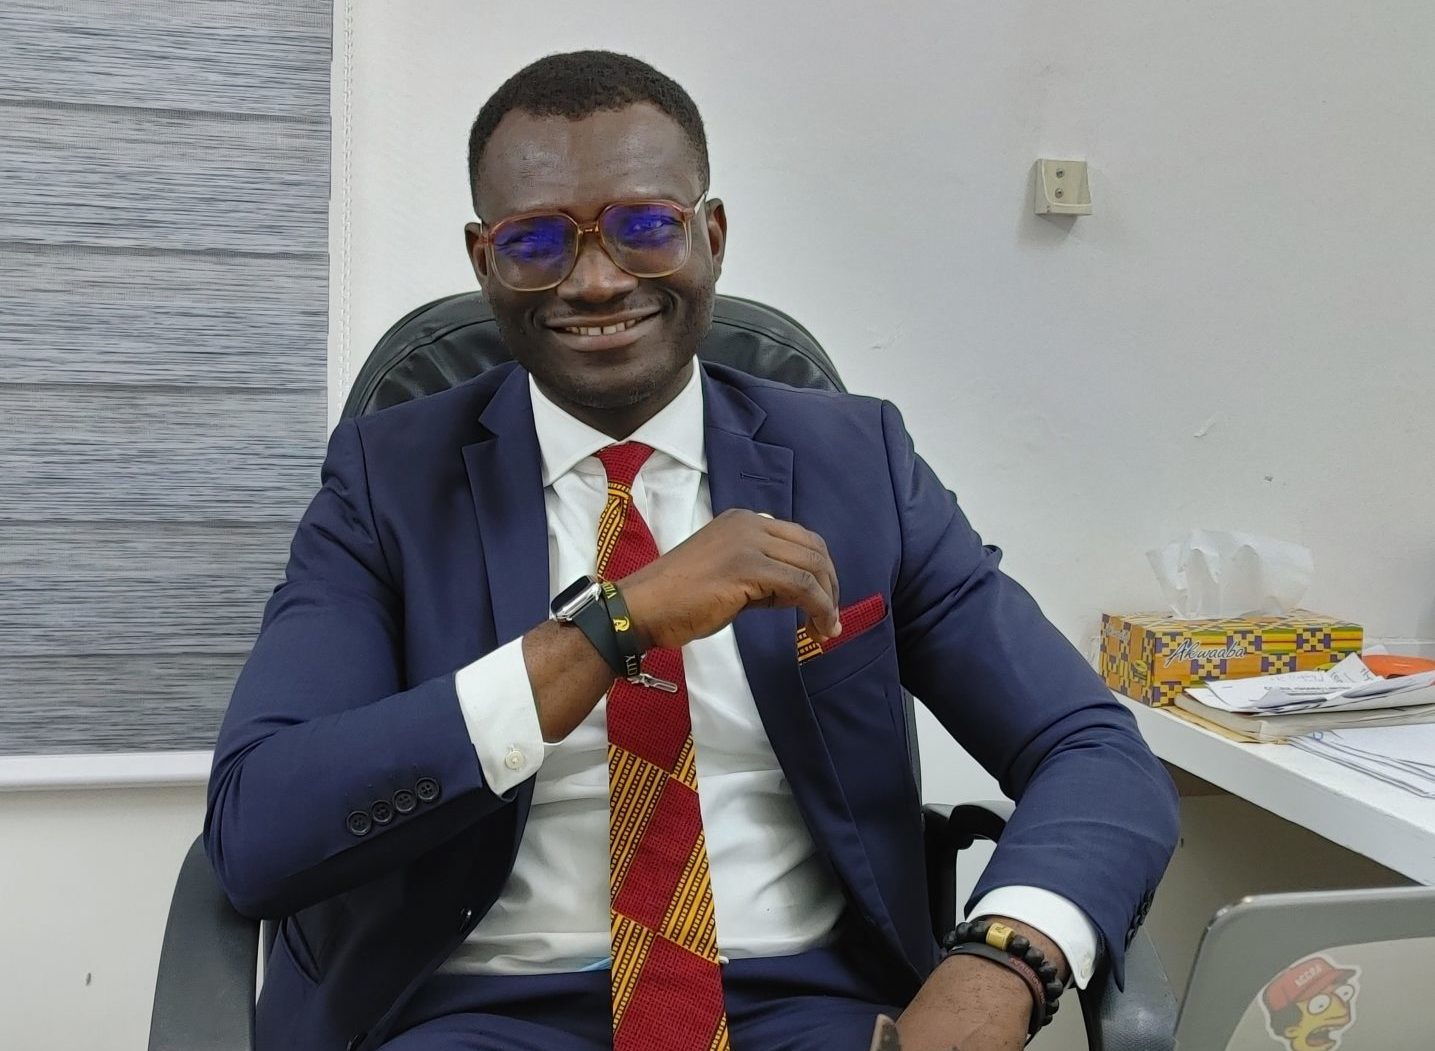 My mother was ready to sell everything to see me succeed - Mr. Agyare new MD of Vienna City tells DKB